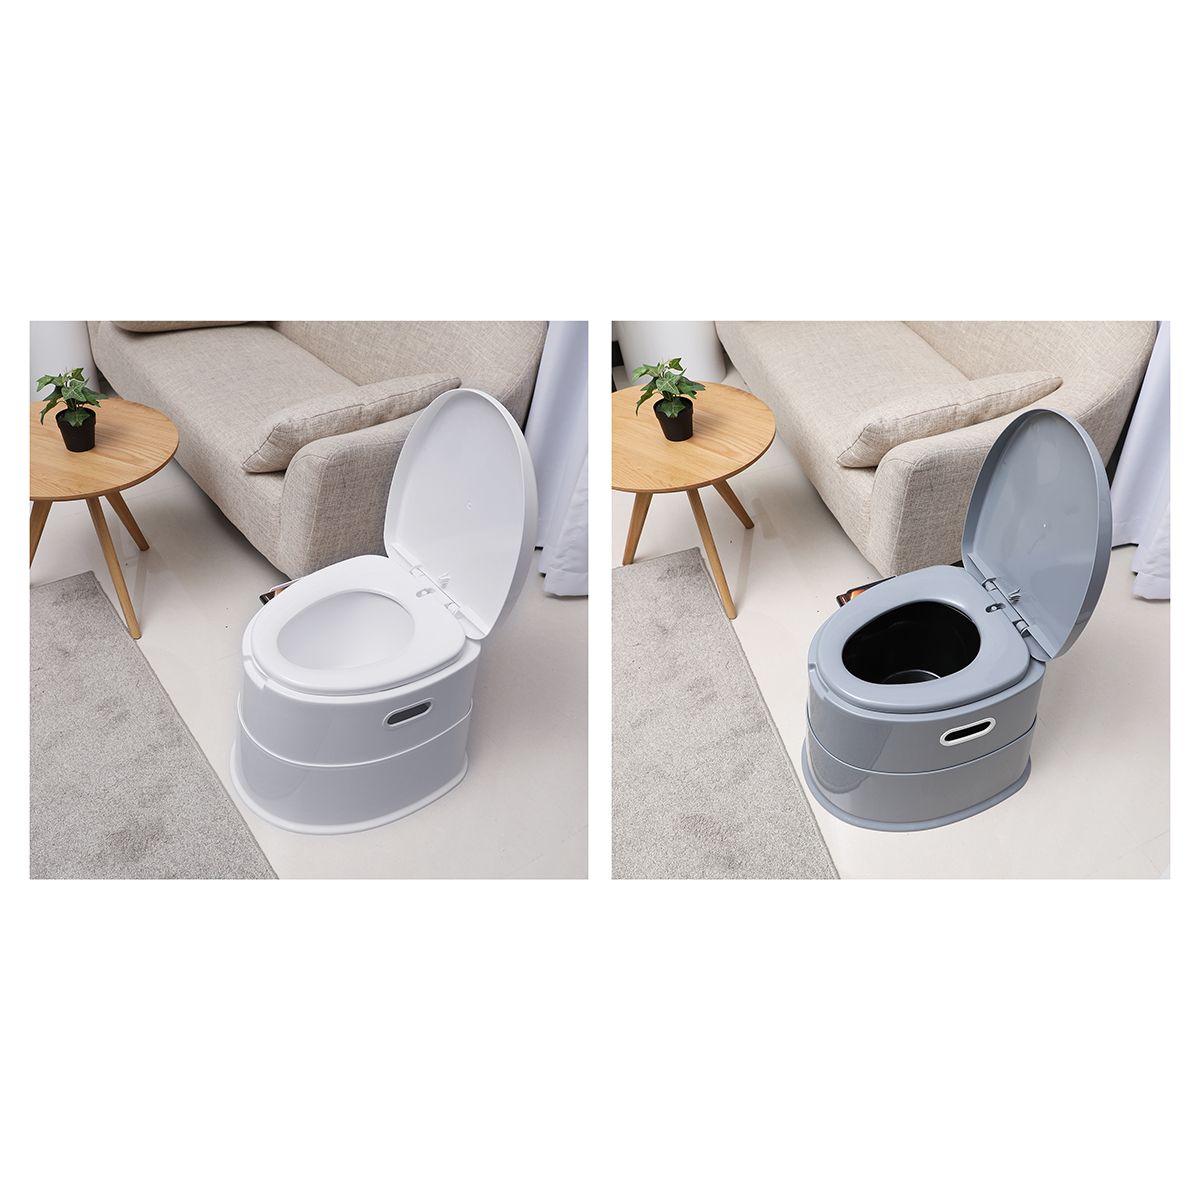 Portable-Toilet-Bowl-Extra-Strong-Durable-Support-Adult-Senior-1553352